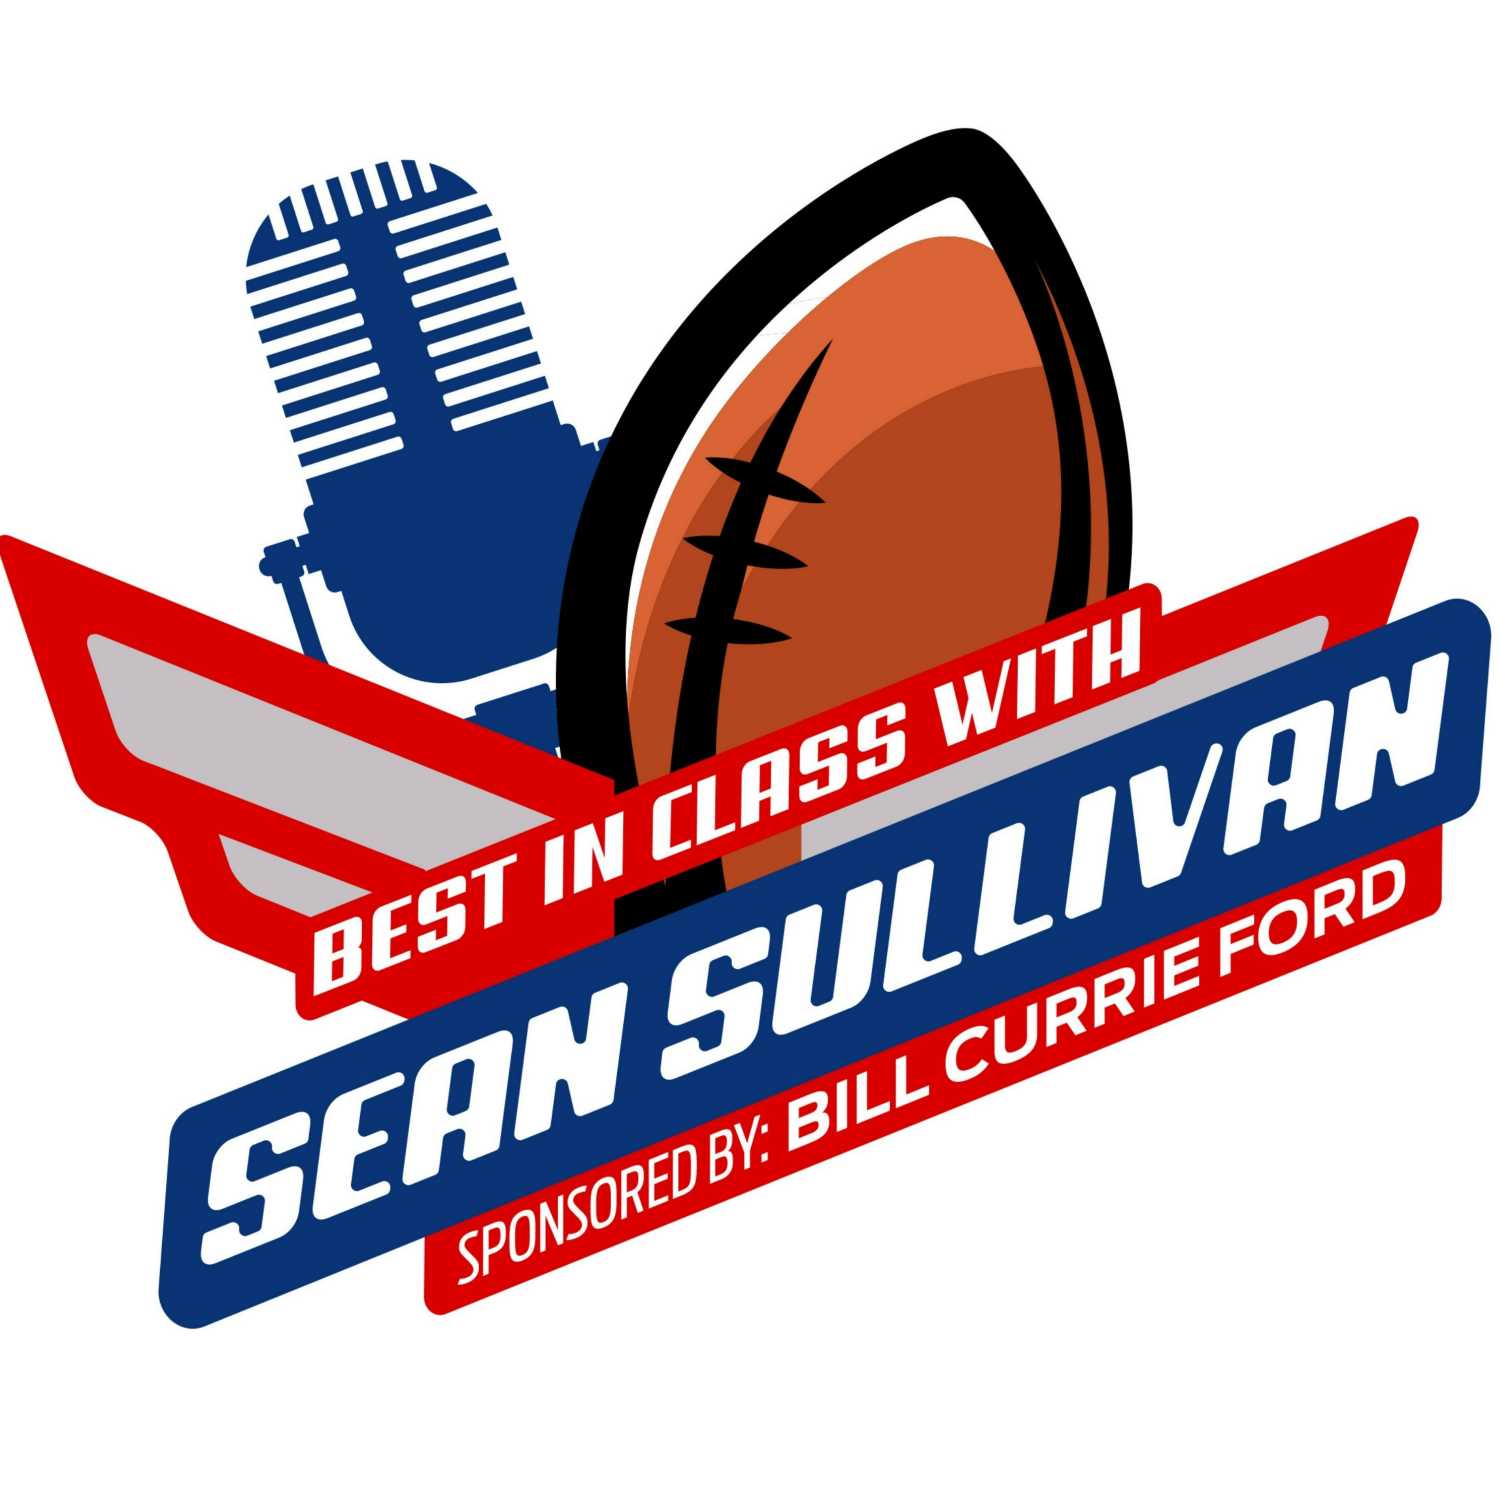 Best In Class Episode 30: Inside The AFC East Draft